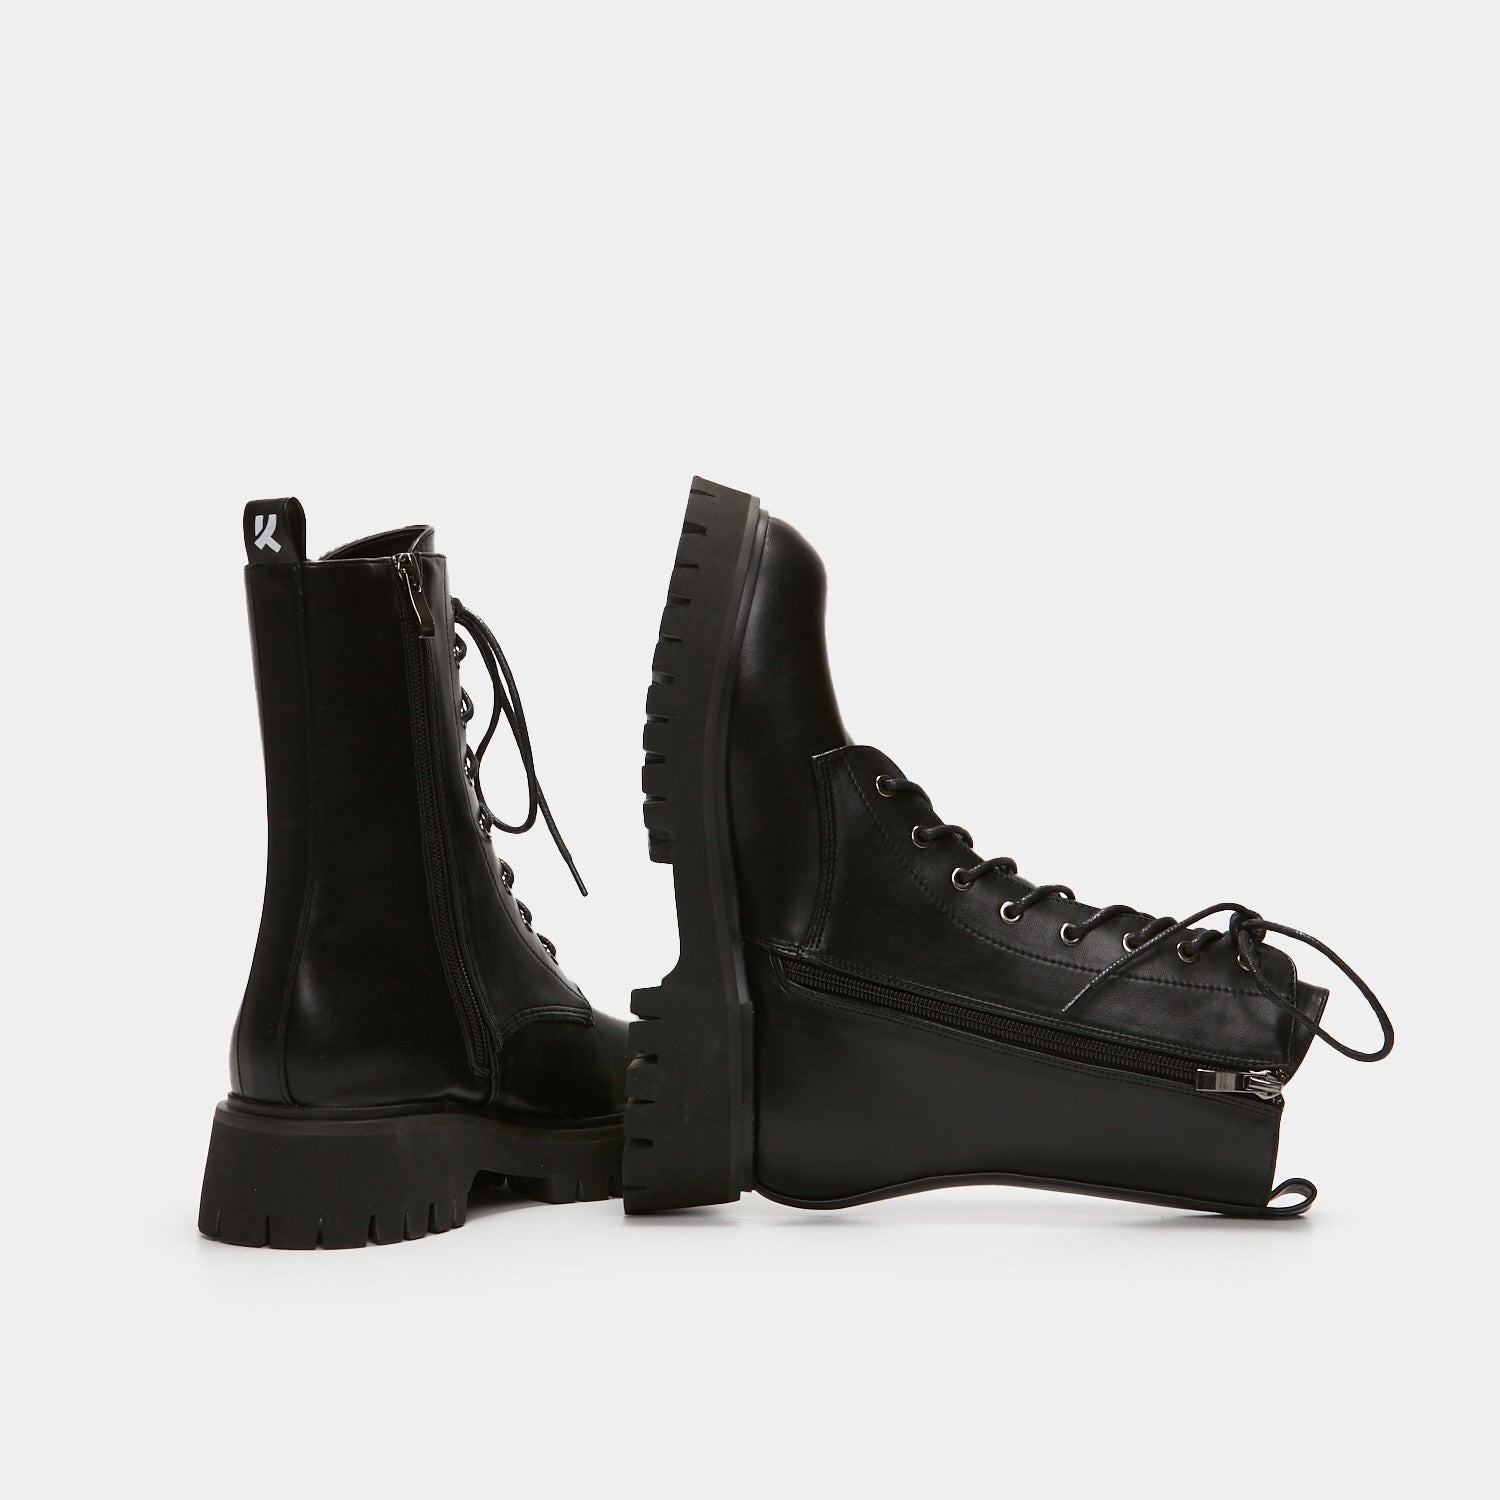 Anchor Black Military Lace Up Boots - Ankle Boots - KOI Footwear - Black - Back and Side View